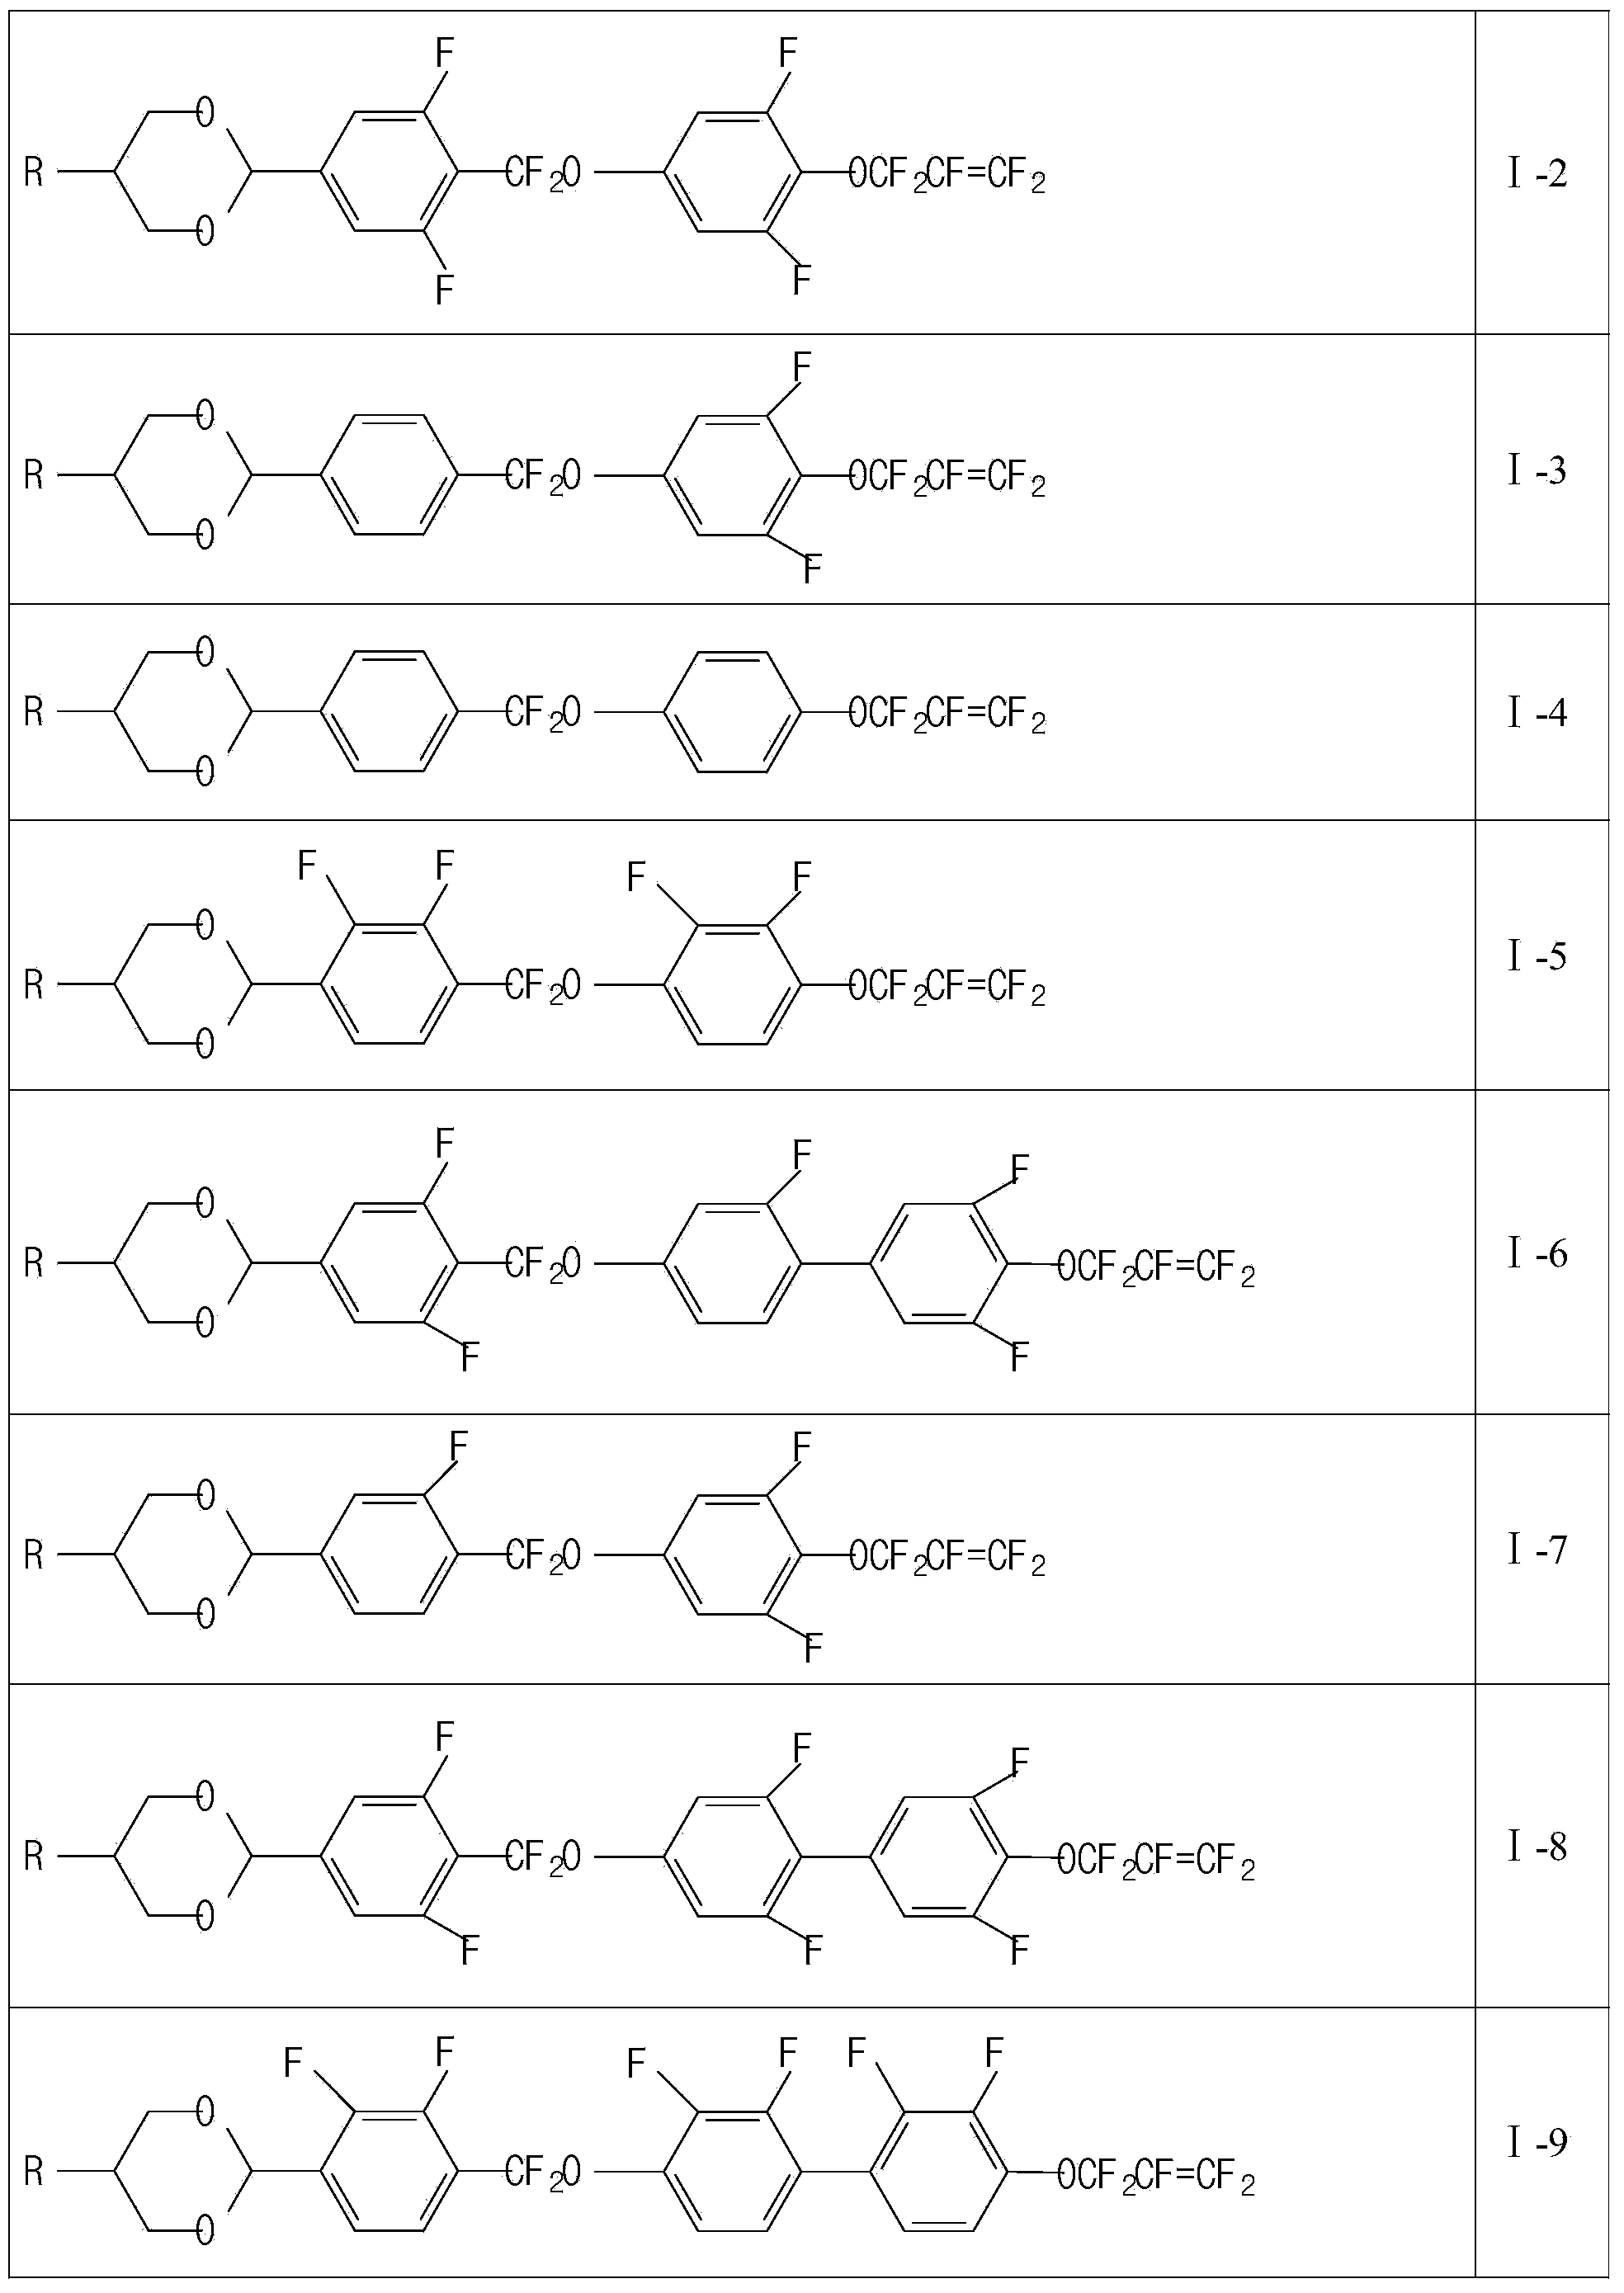 Liquid crystal compound containing 1,4-dioxane and pentafluoro-allyloxy structure and liquid crystal composition thereof